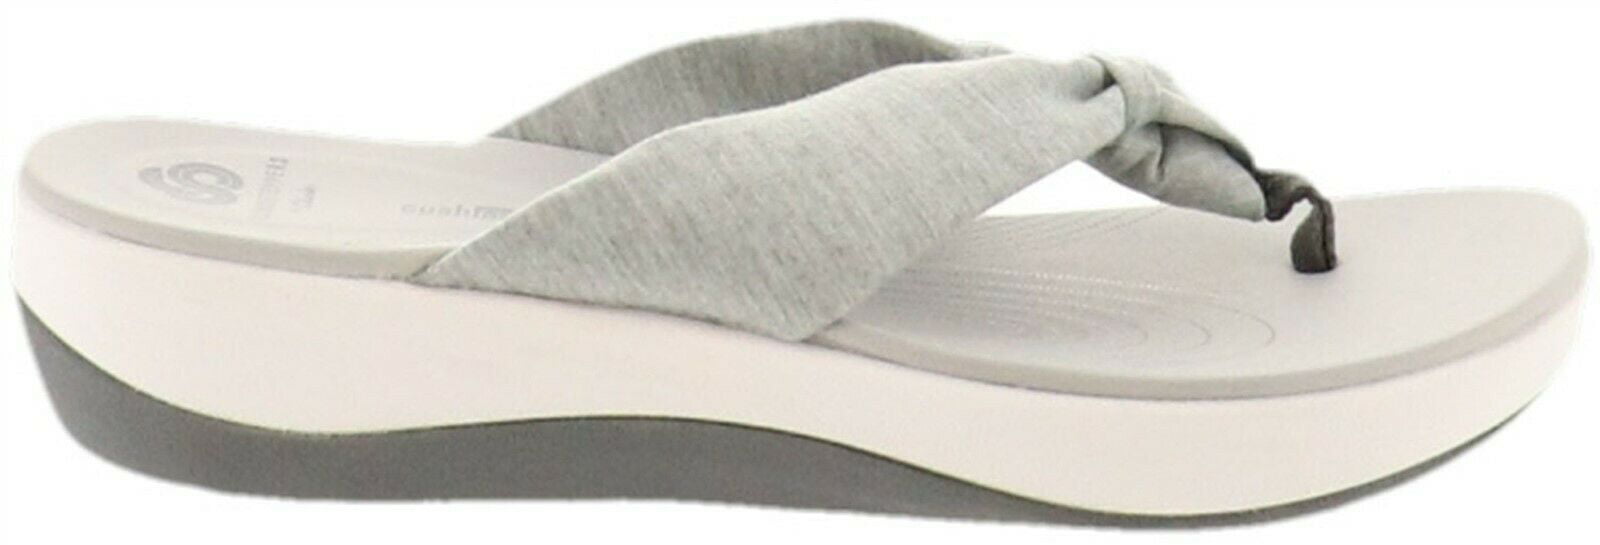 Clarks Cloudsteppers Thong Sandals Online, SAVE 52%.